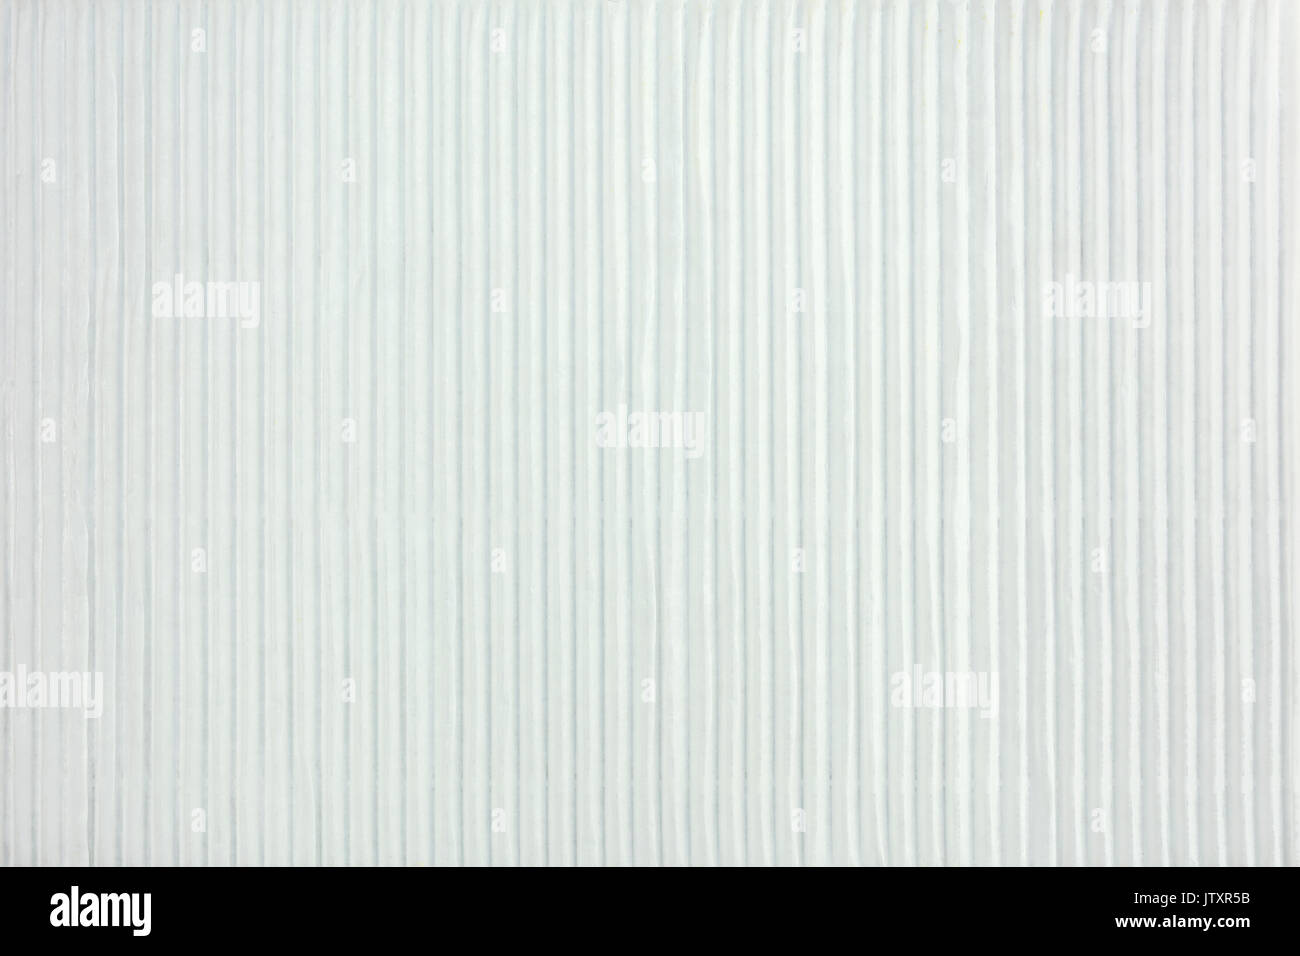 white corrugated striped textured cardboard abstract bright surface background Stock Photo